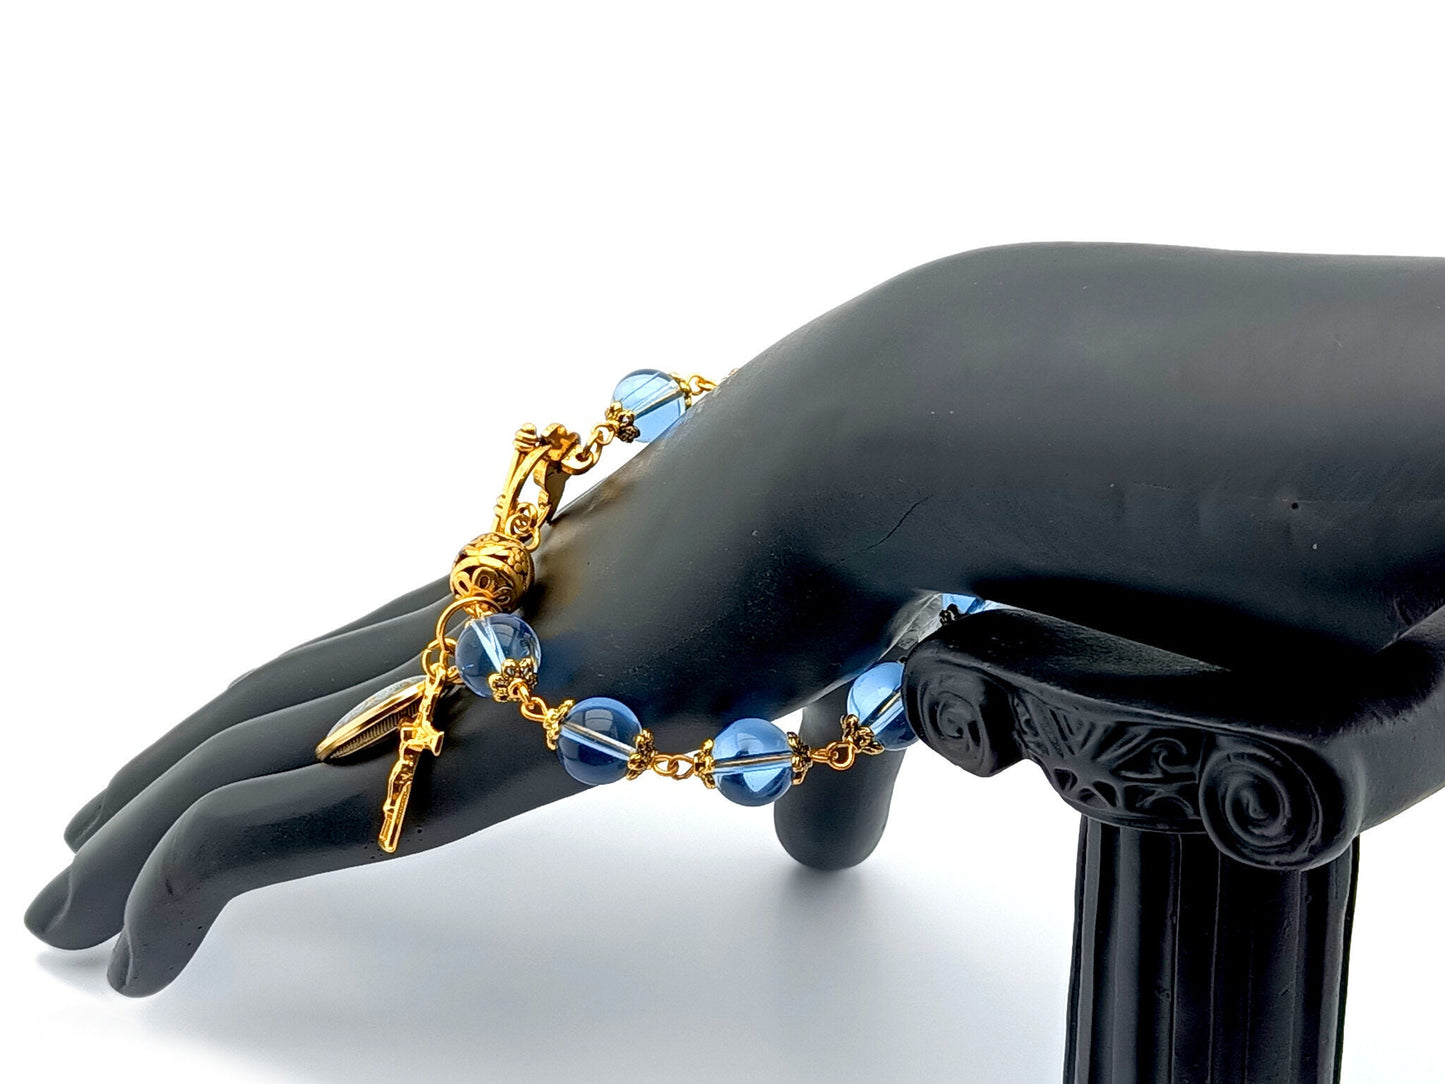 Our Lady of Lourdesunique rosary beads single decade rosary bracelet with gold and blue glass beads and gold crucifix.